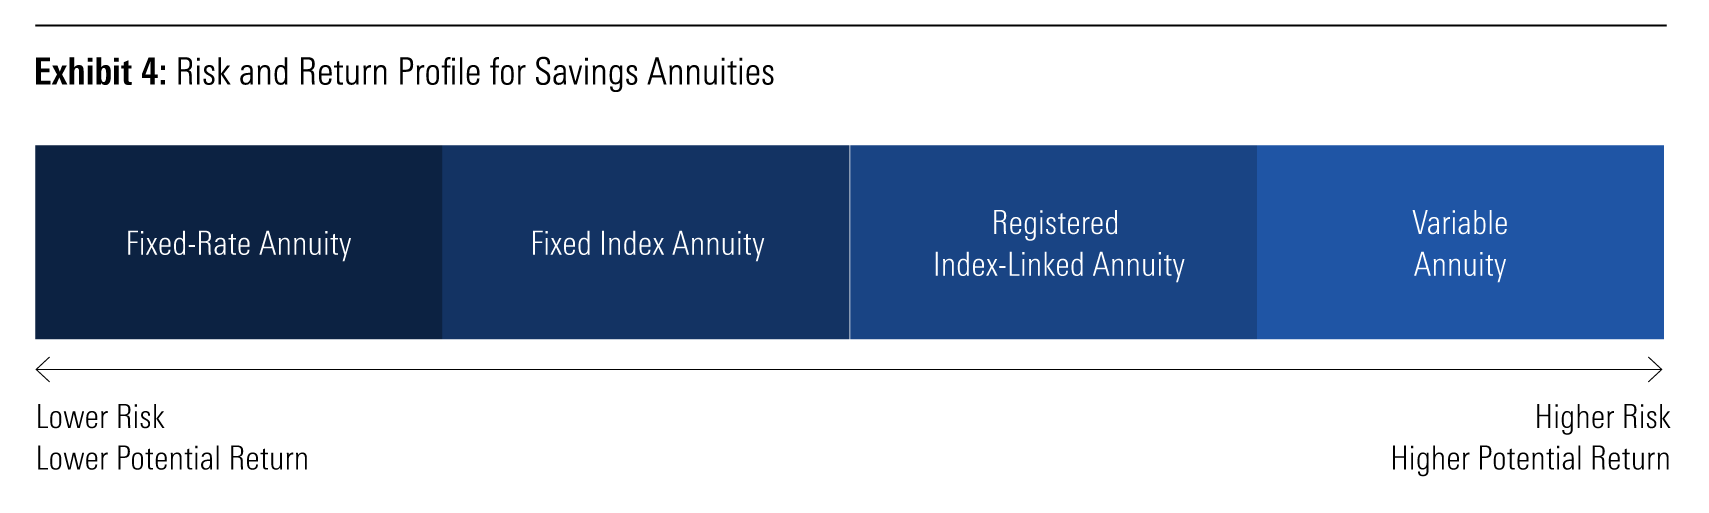 Risk and Return Profile for Savings Annuities